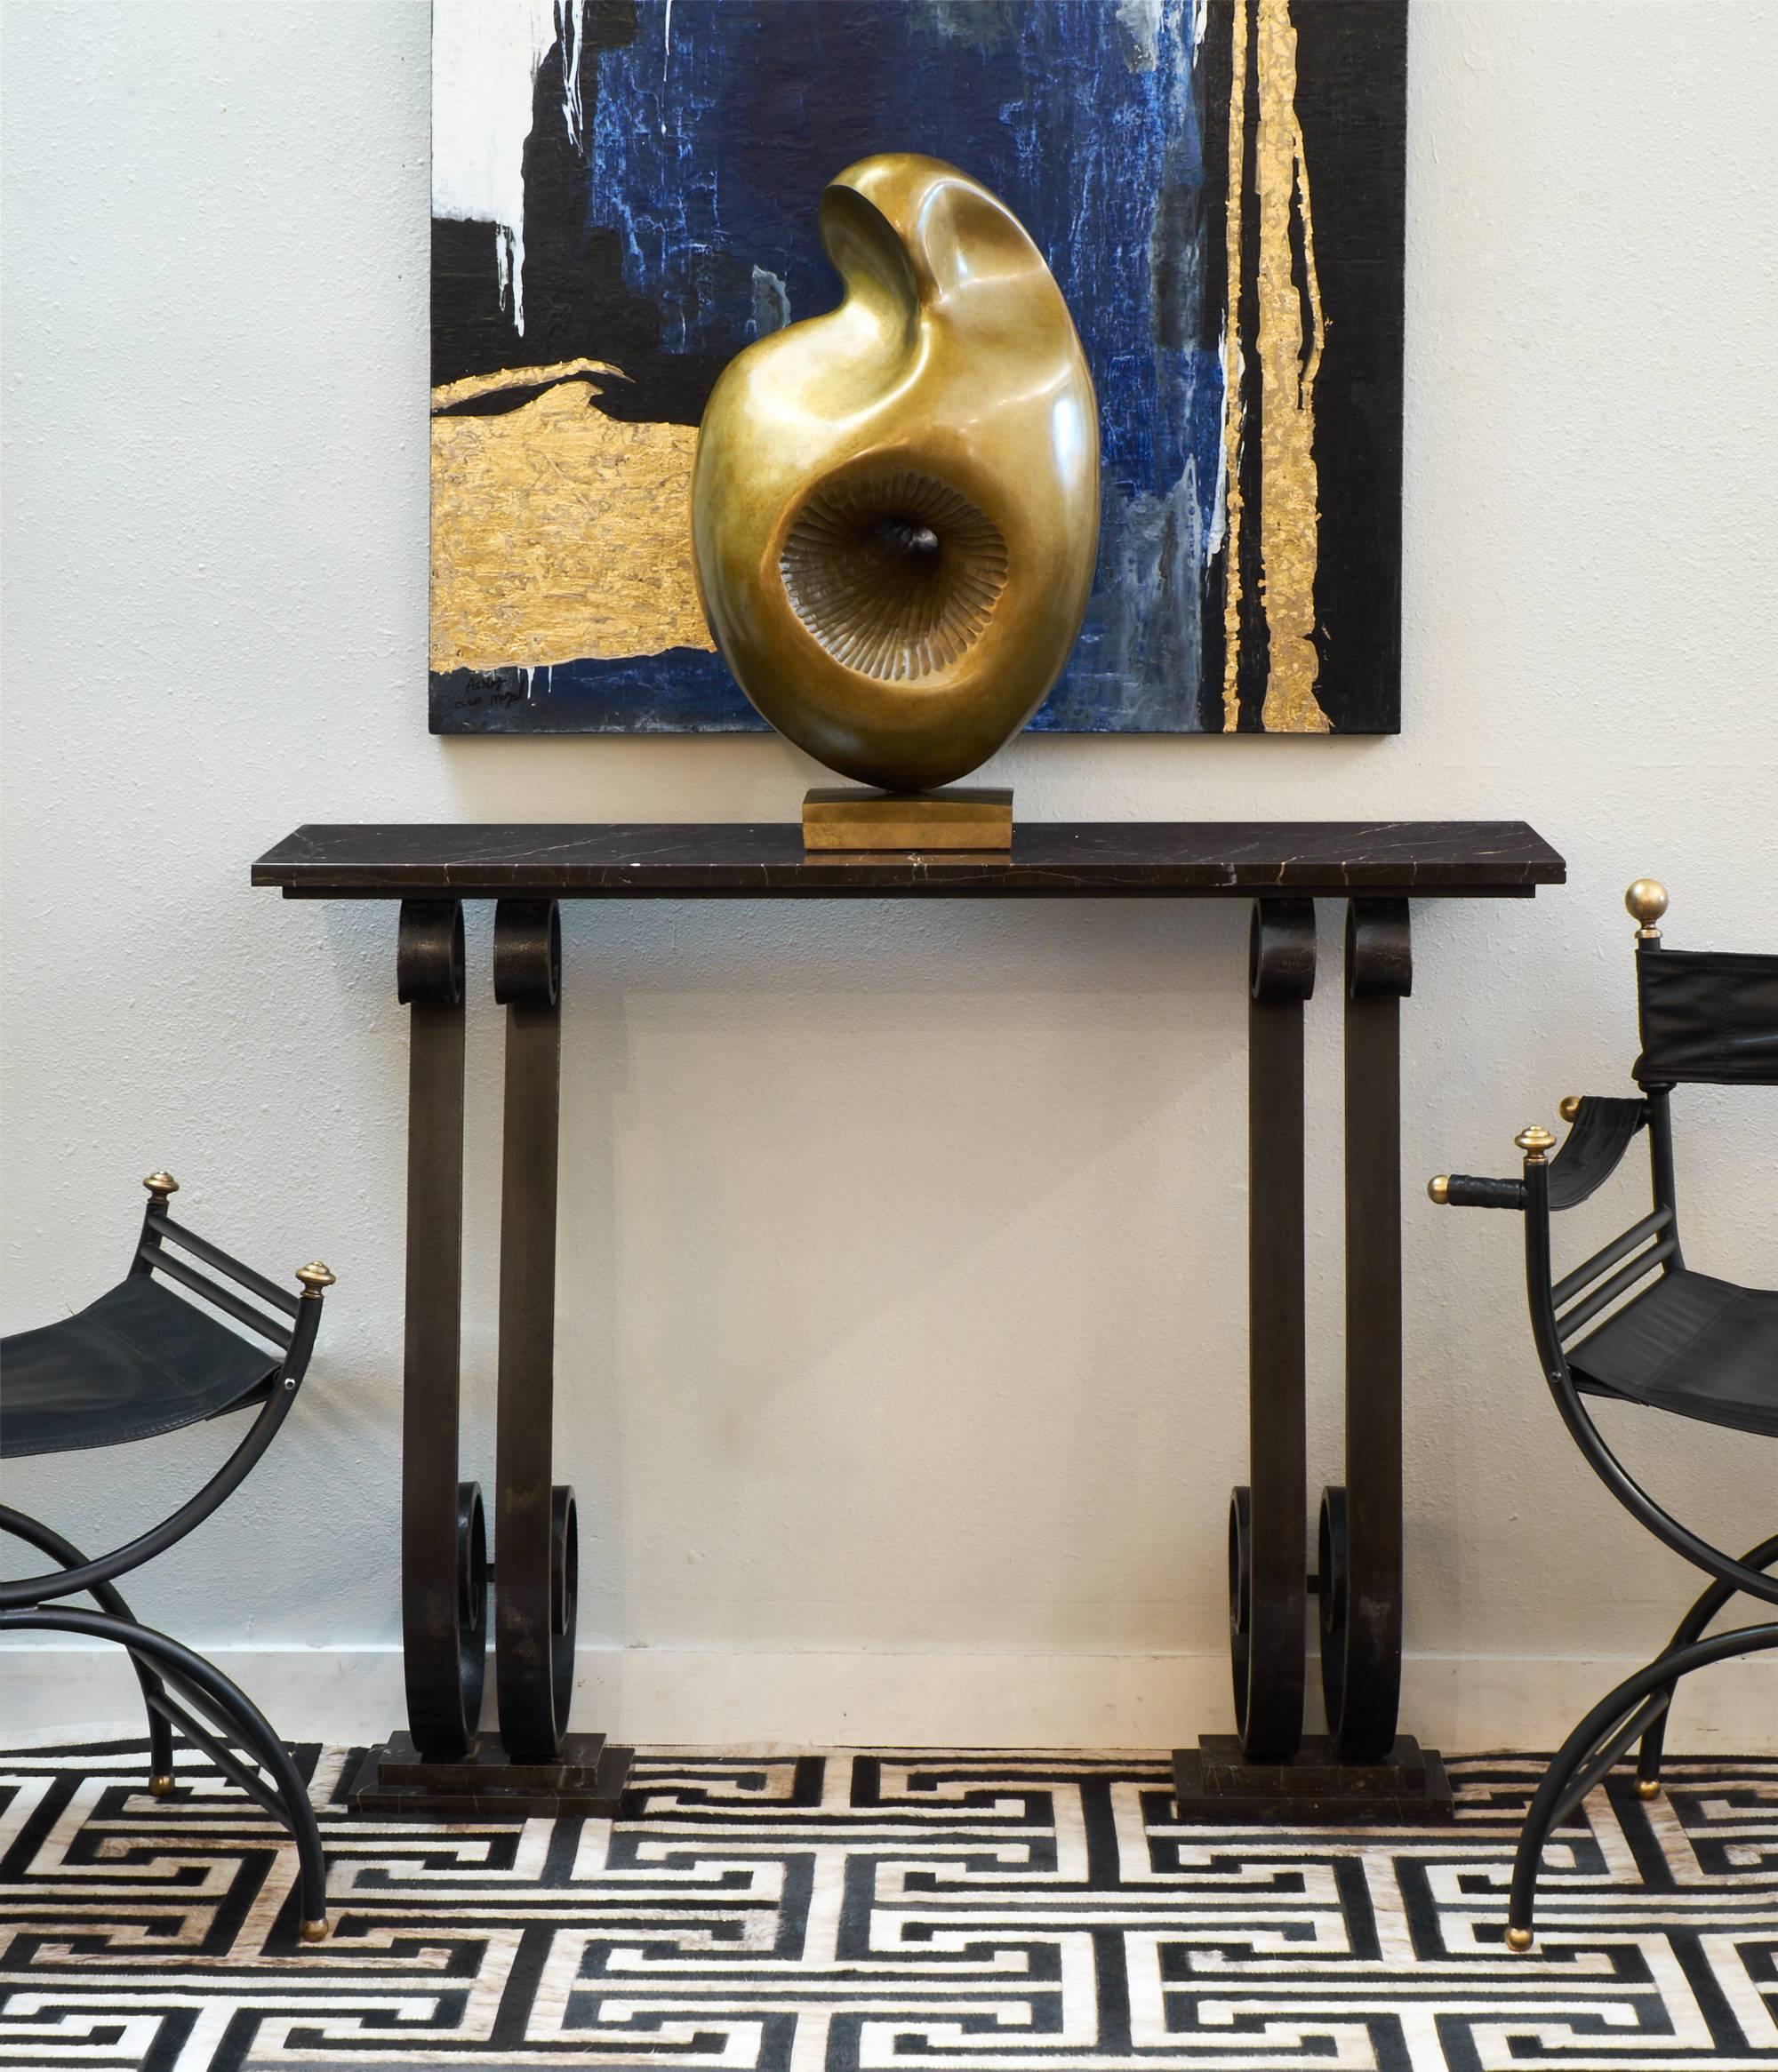 French Art Deco forged iron console table with beautiful black marble top flowing with white and amber striations. Sophisticated and bold base design with fantastic proportions, this sculptural table almost is a true work of art.